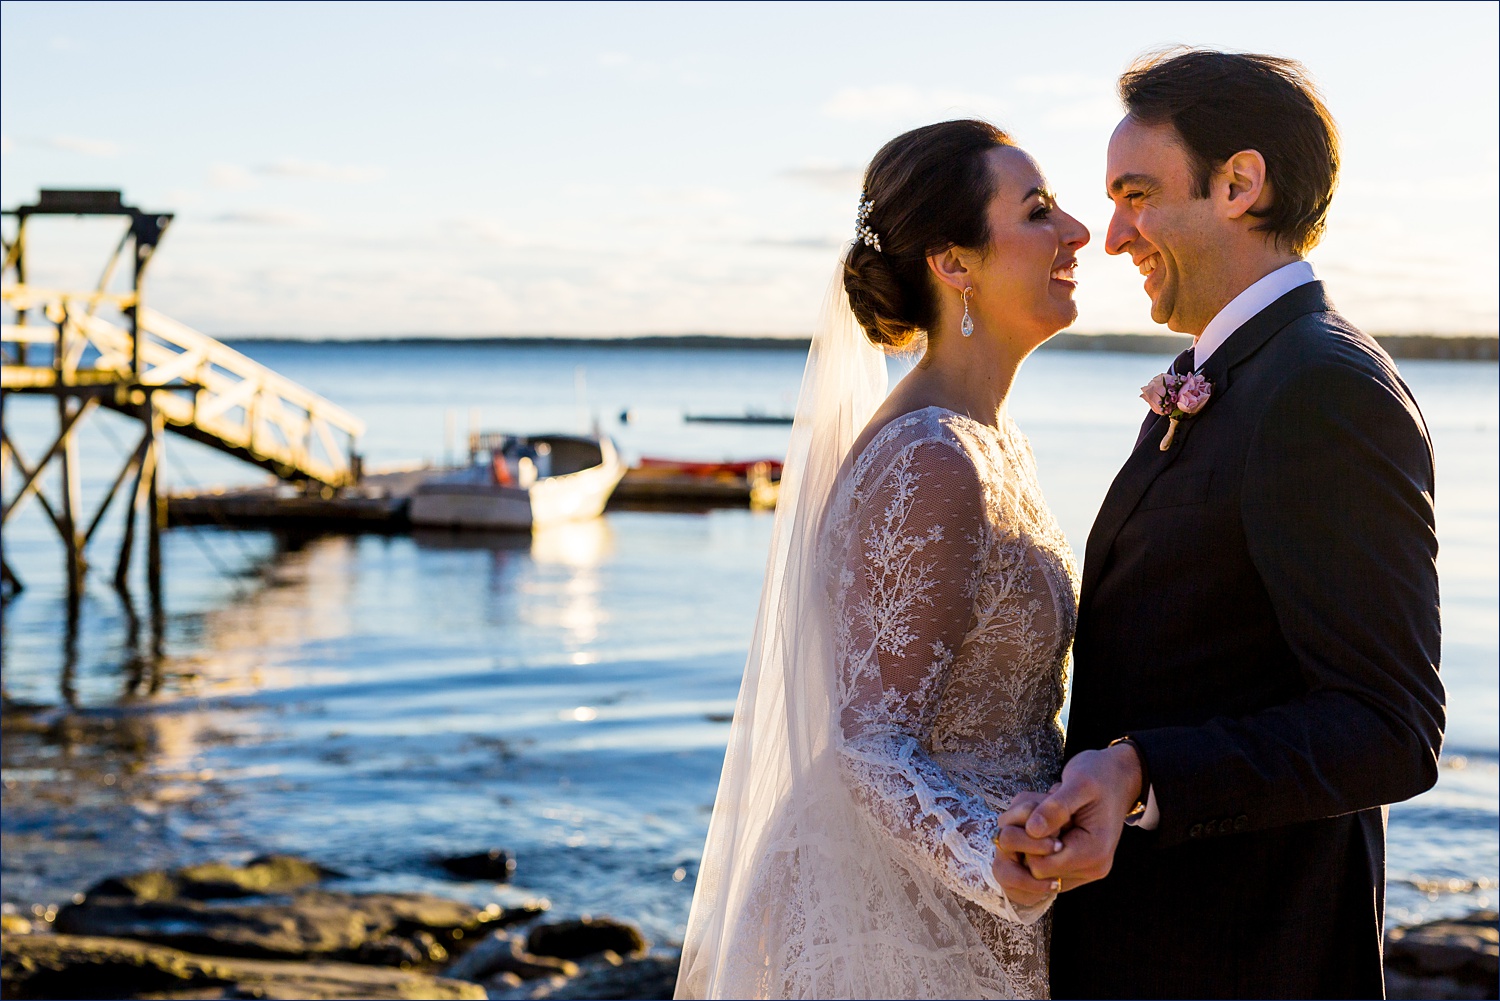 The bride and groom enjoy a laugh out by the water in Midcoast Maine